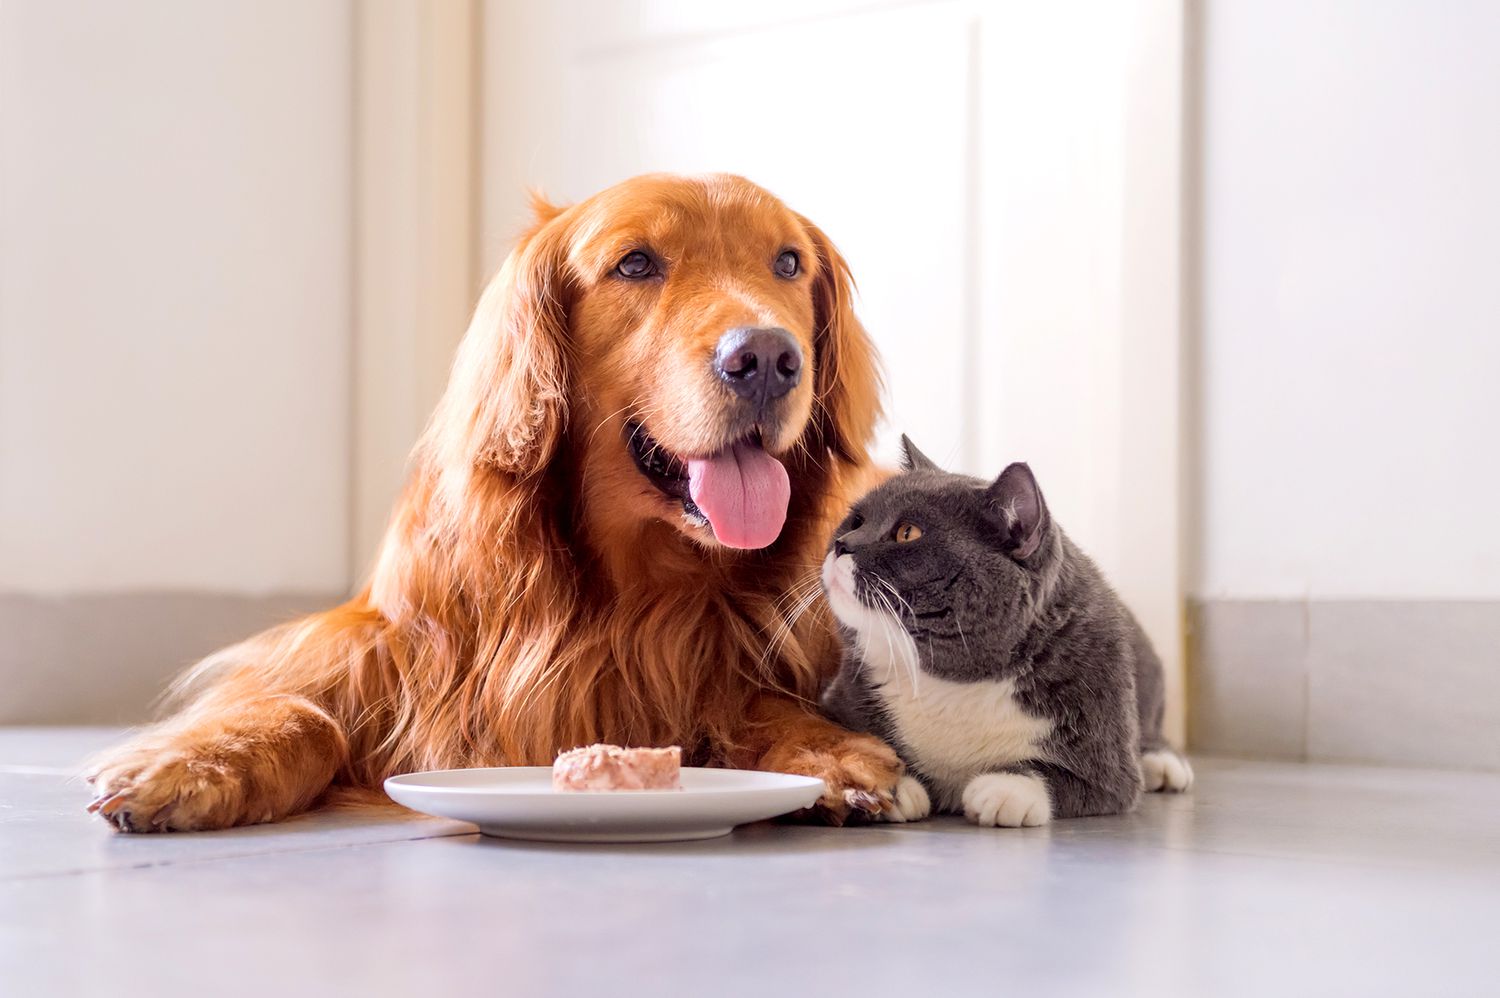 Dog and cat sitting together in front of food